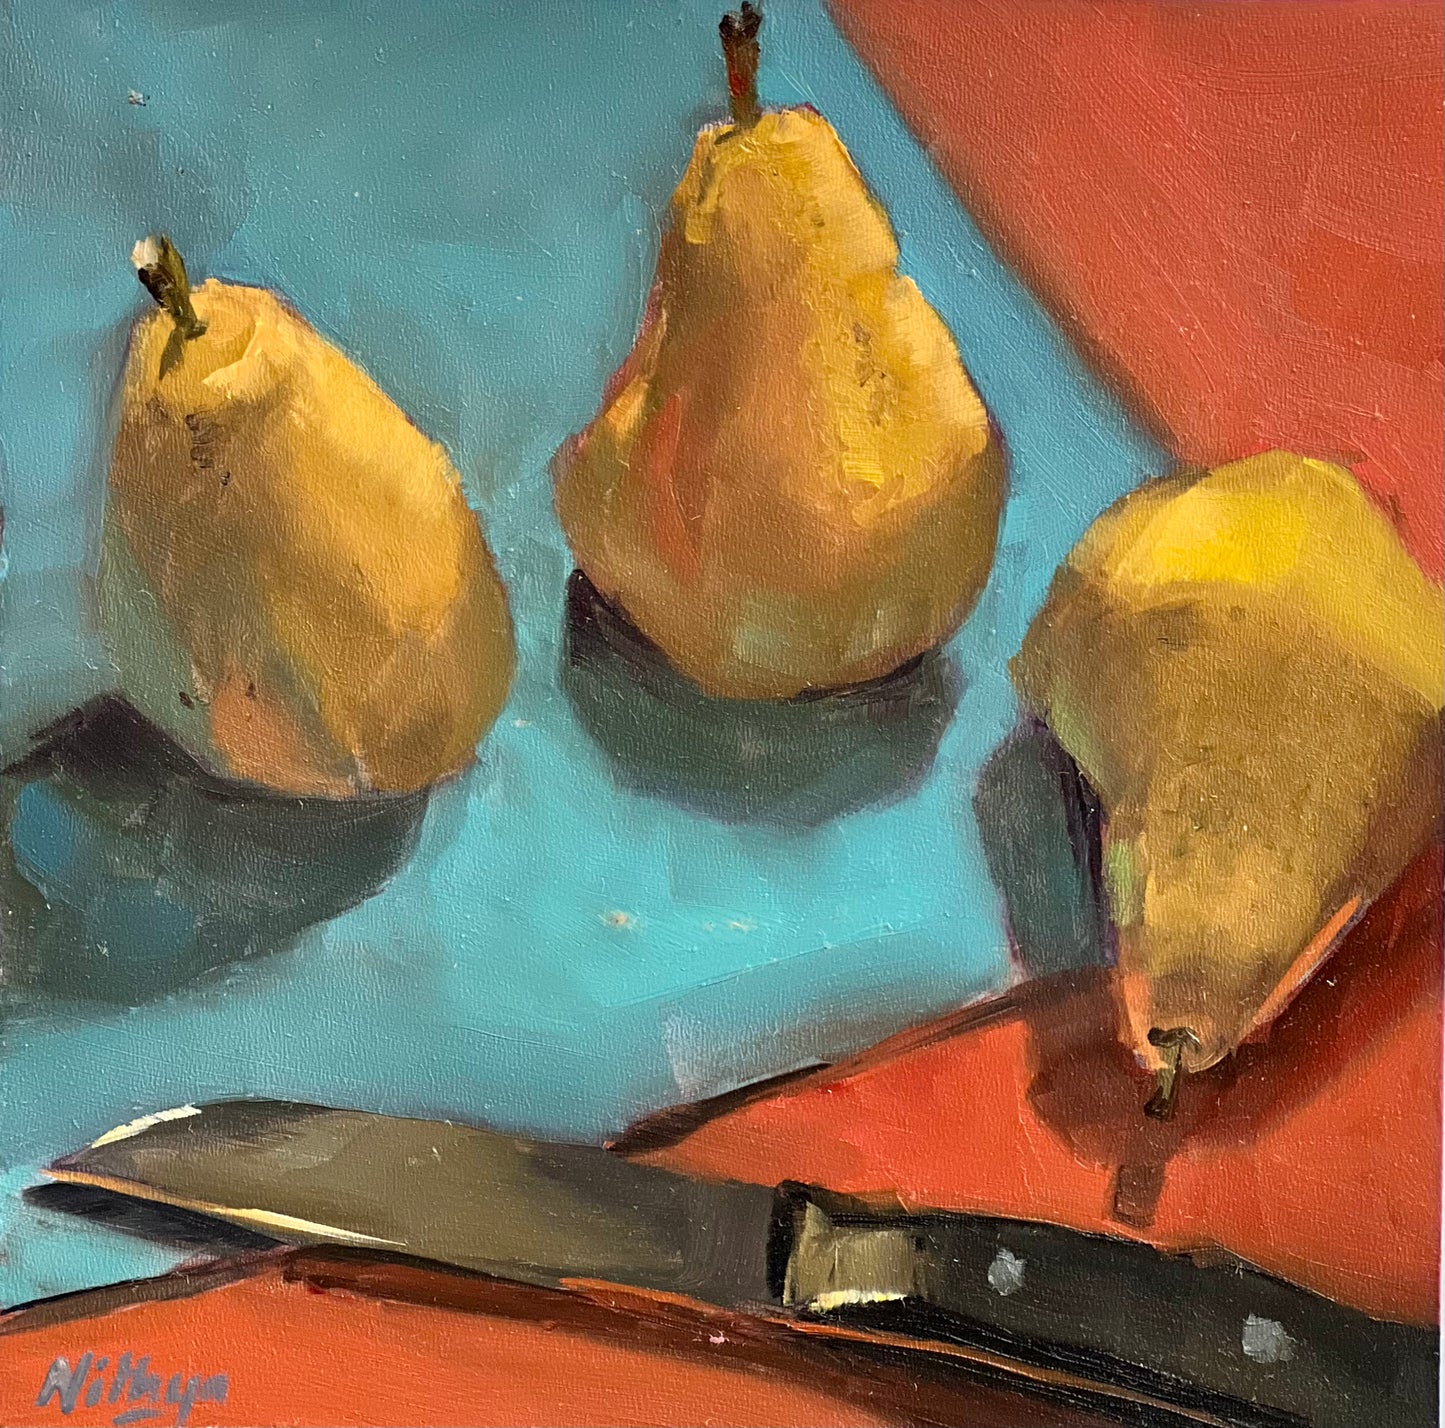 Small Oil Painting - Pears and Knife